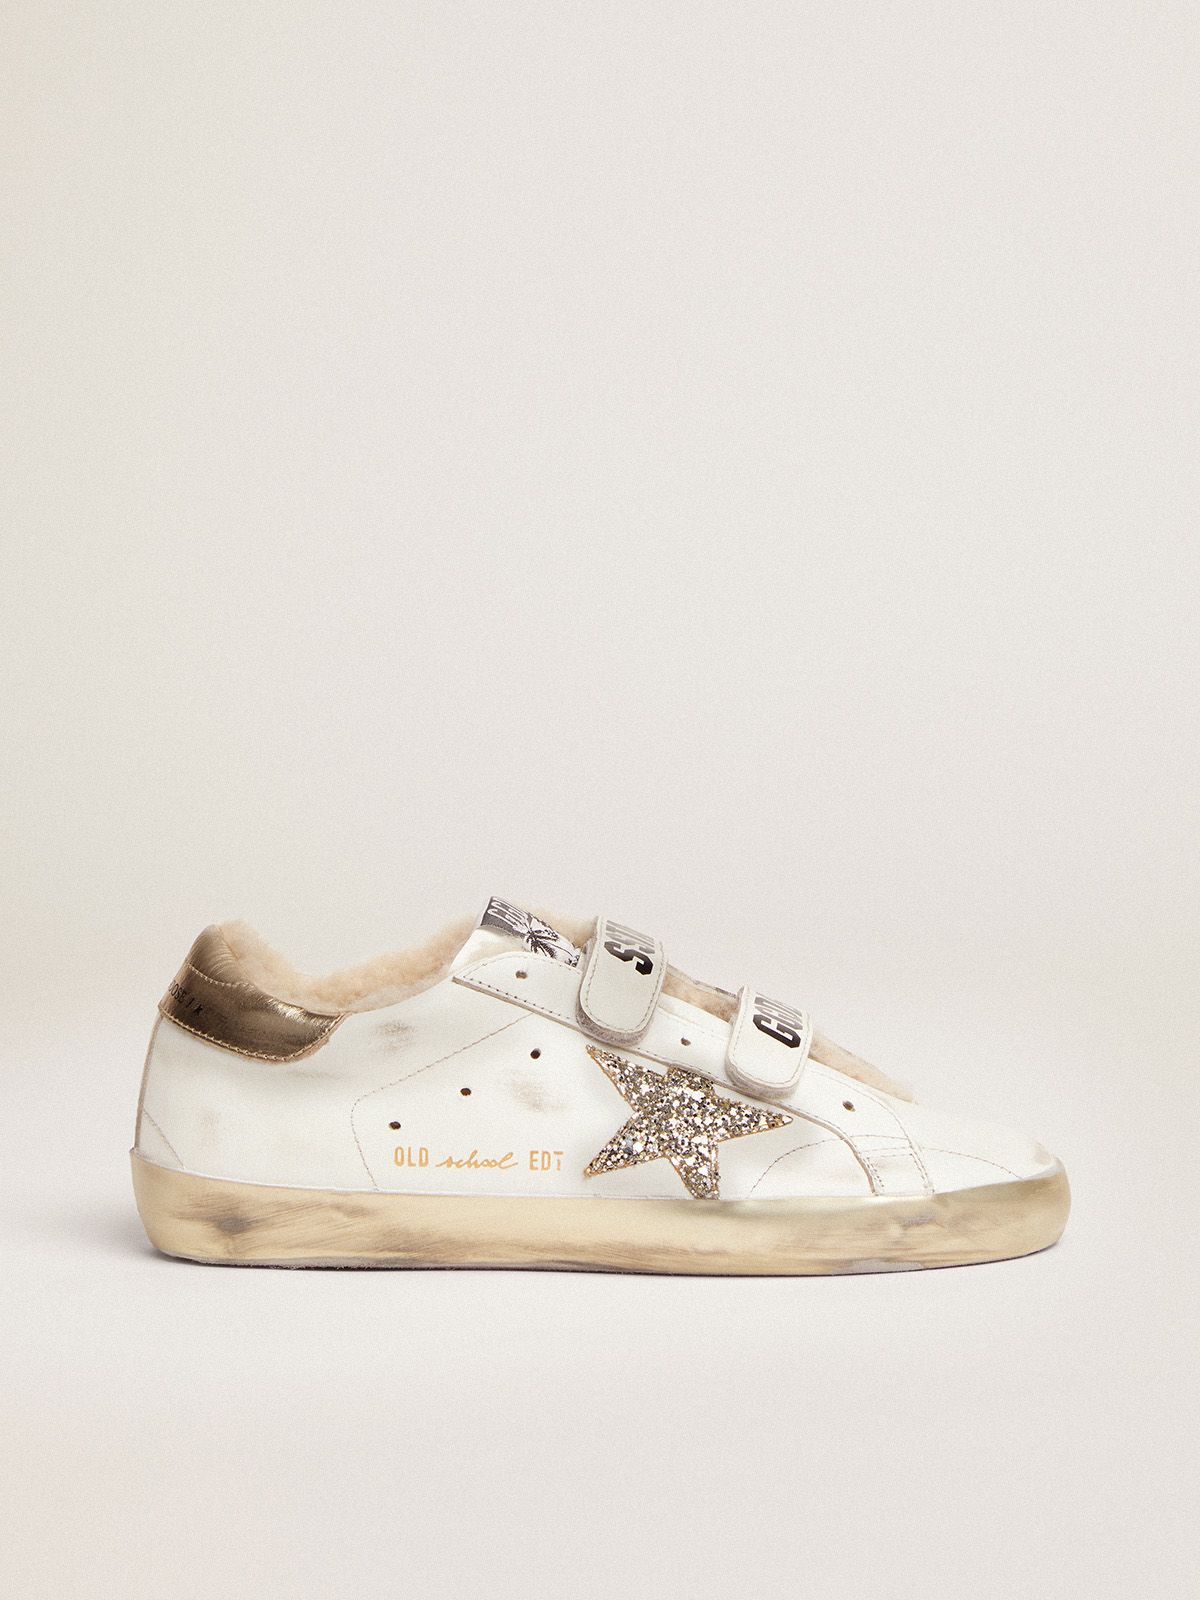 Old School sneakers in white leather with platinum-colored glitter star and shearling lining